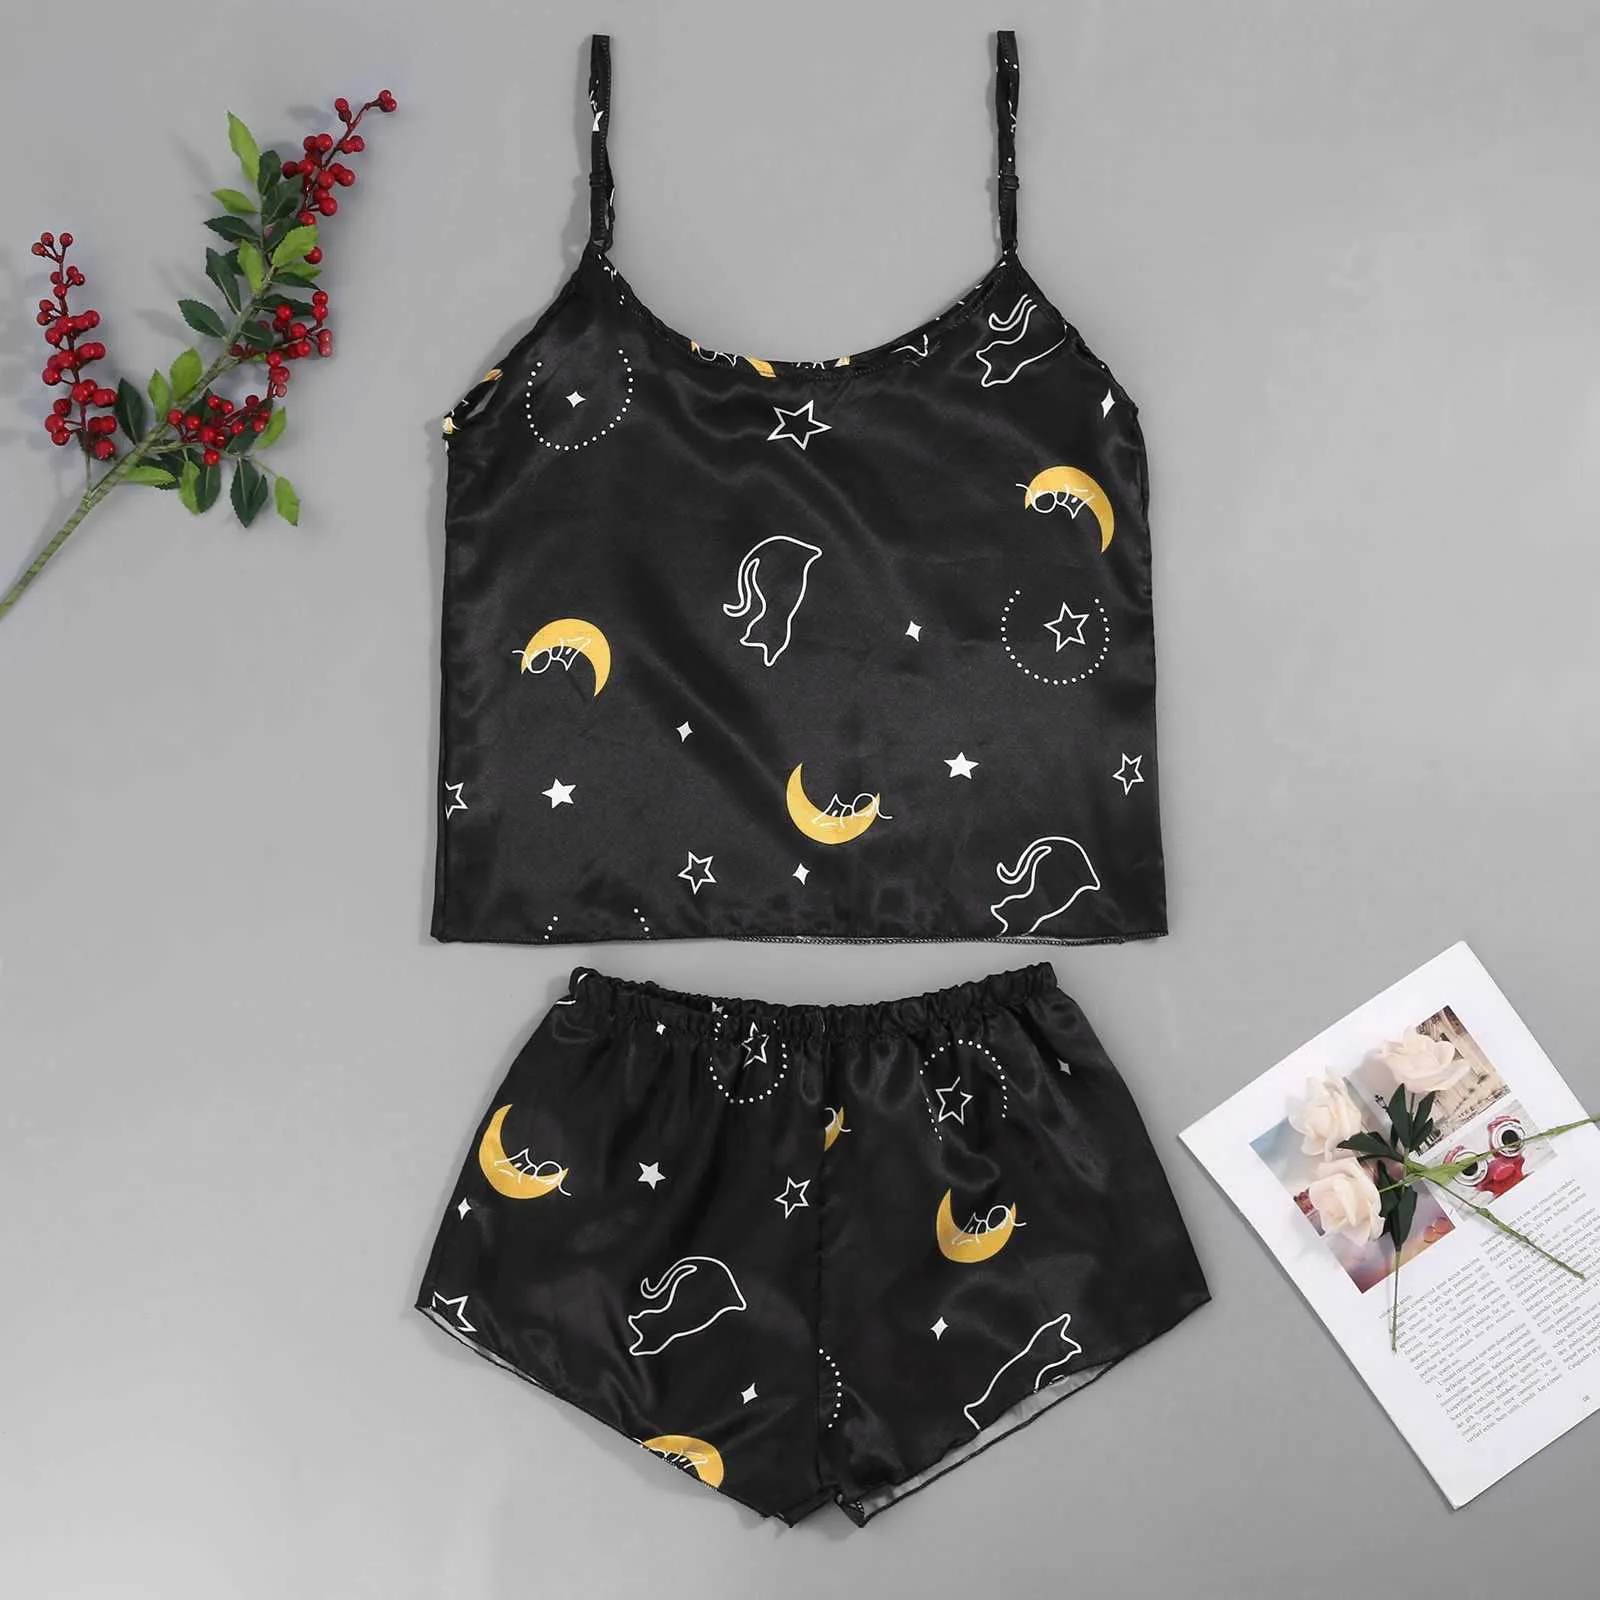 Simple And Cute Summer Lace Sling Sleep Shorts Pajama Set For